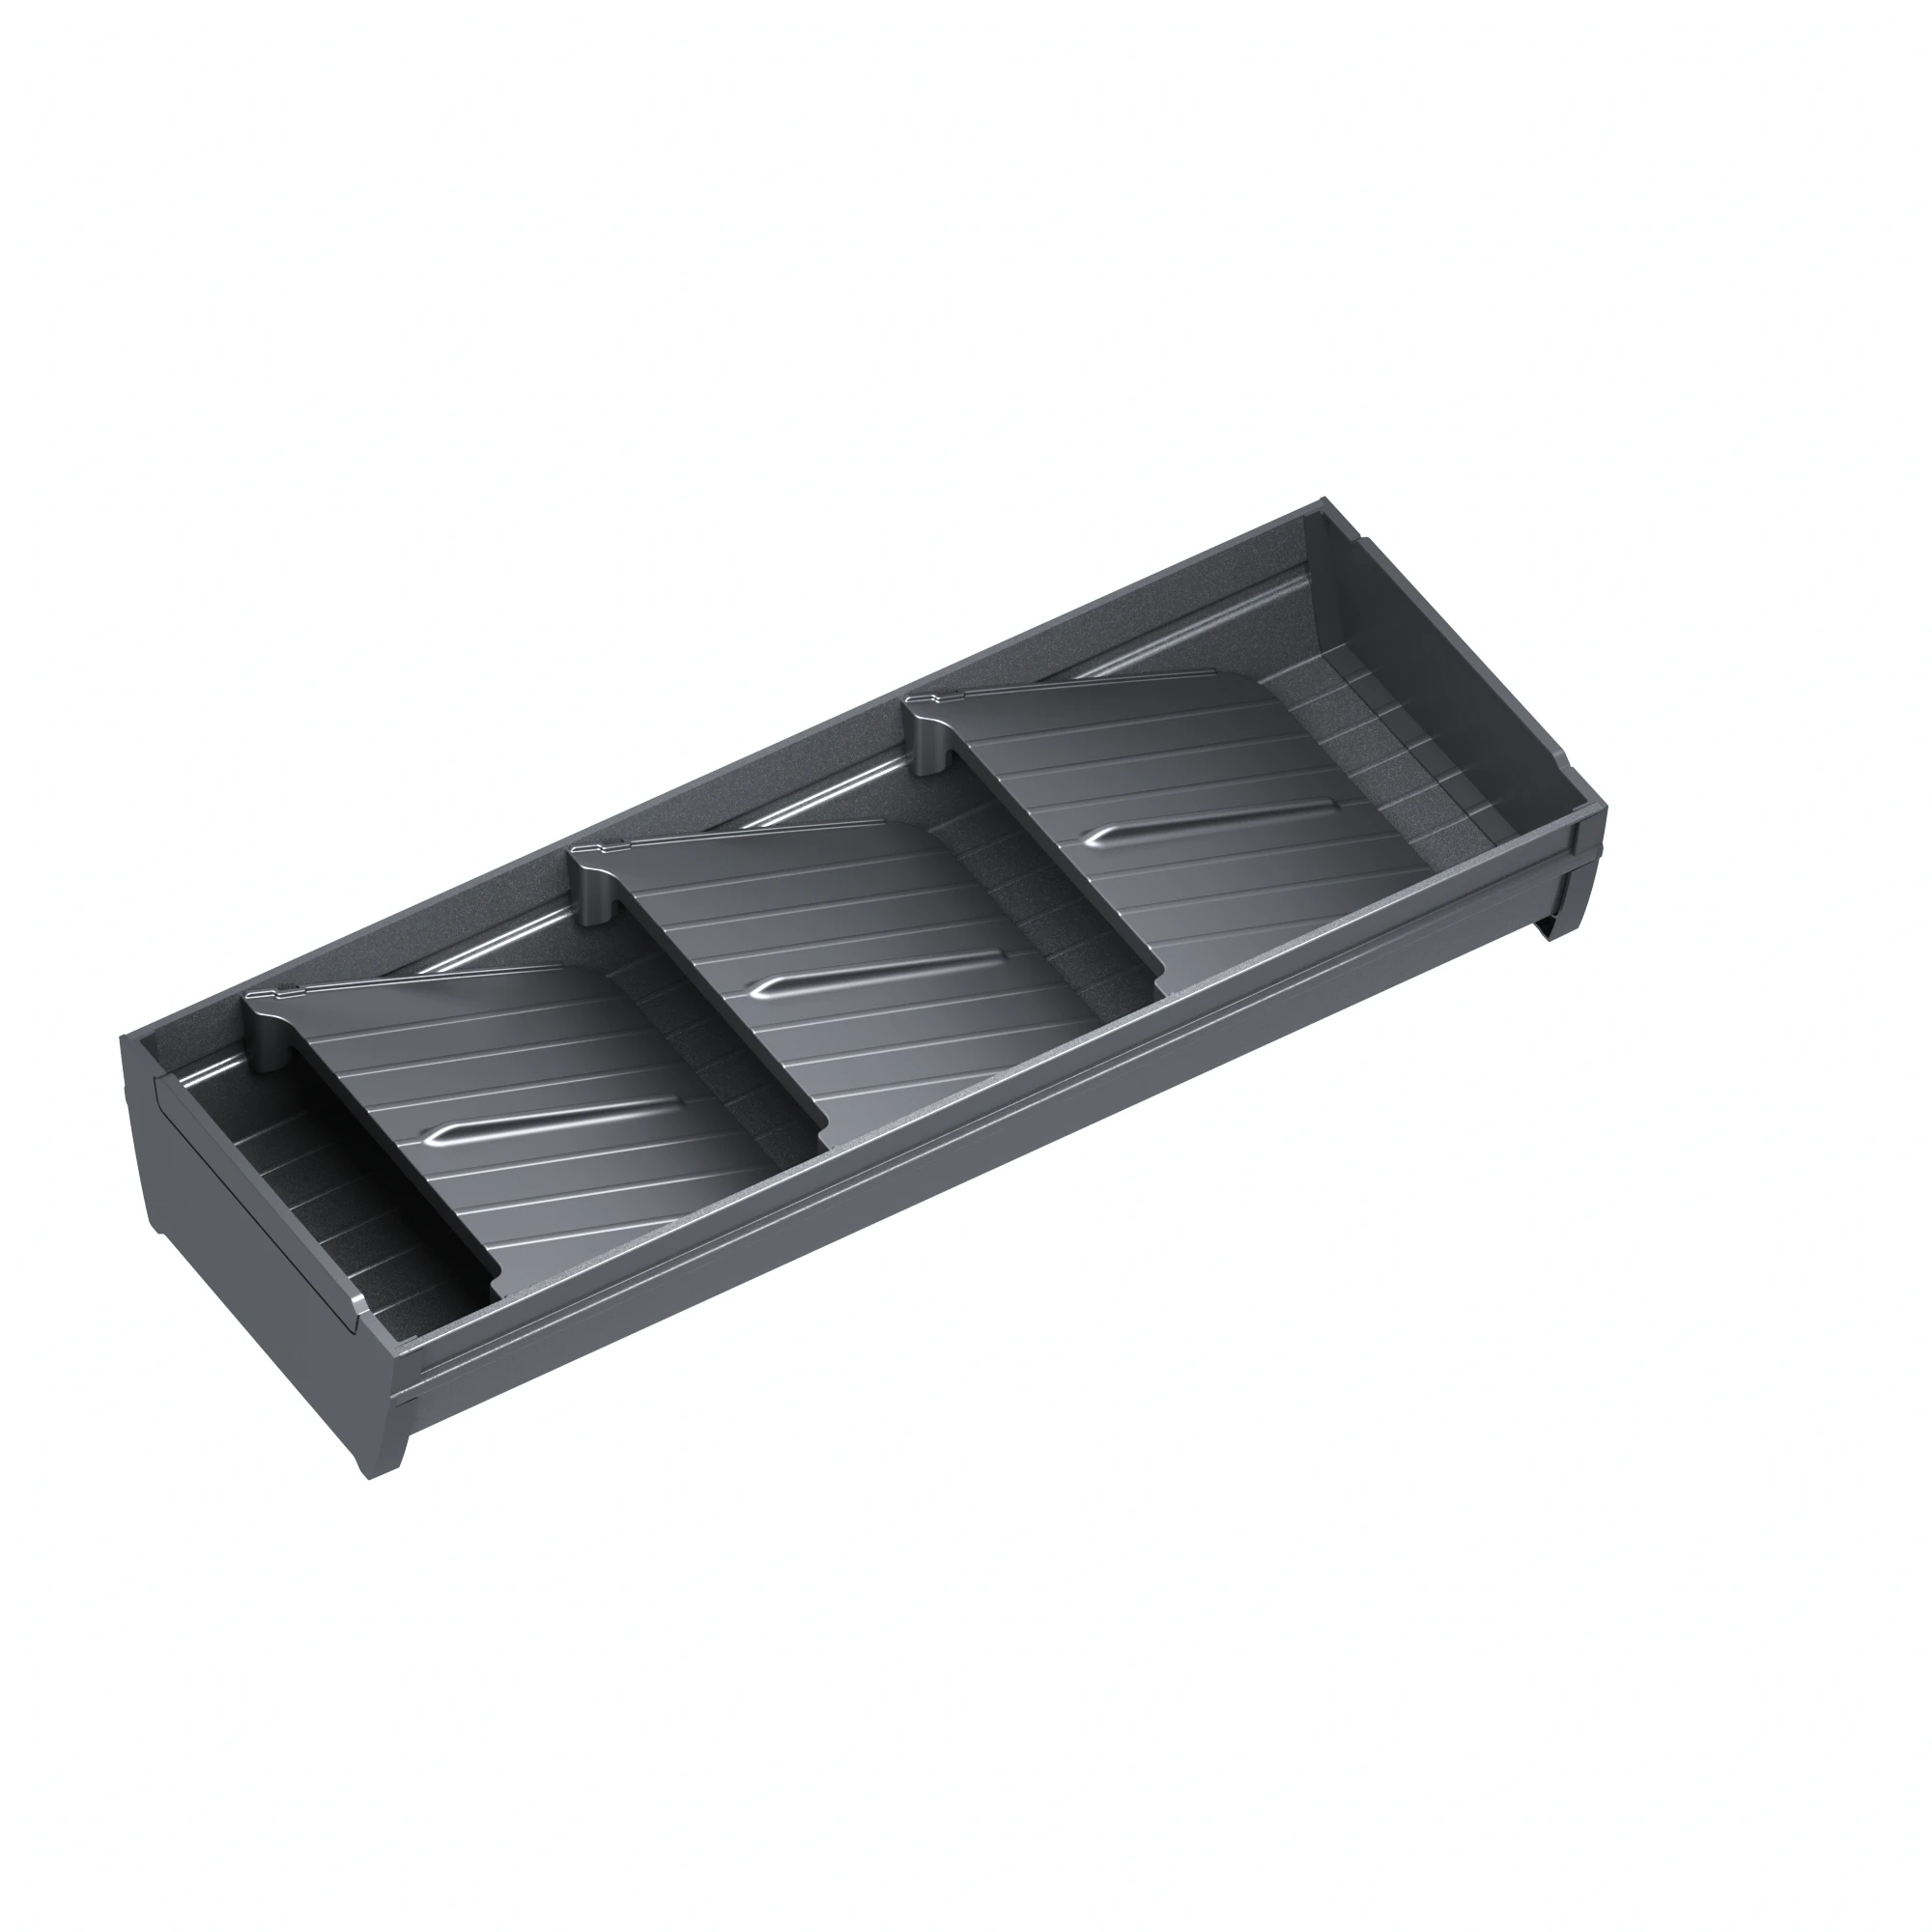 

In-drawer cutlery Organisers, smart cutlery holders, knife tray-Compartment Drawer Insert Large Extendable DCH1547B, Dark gray